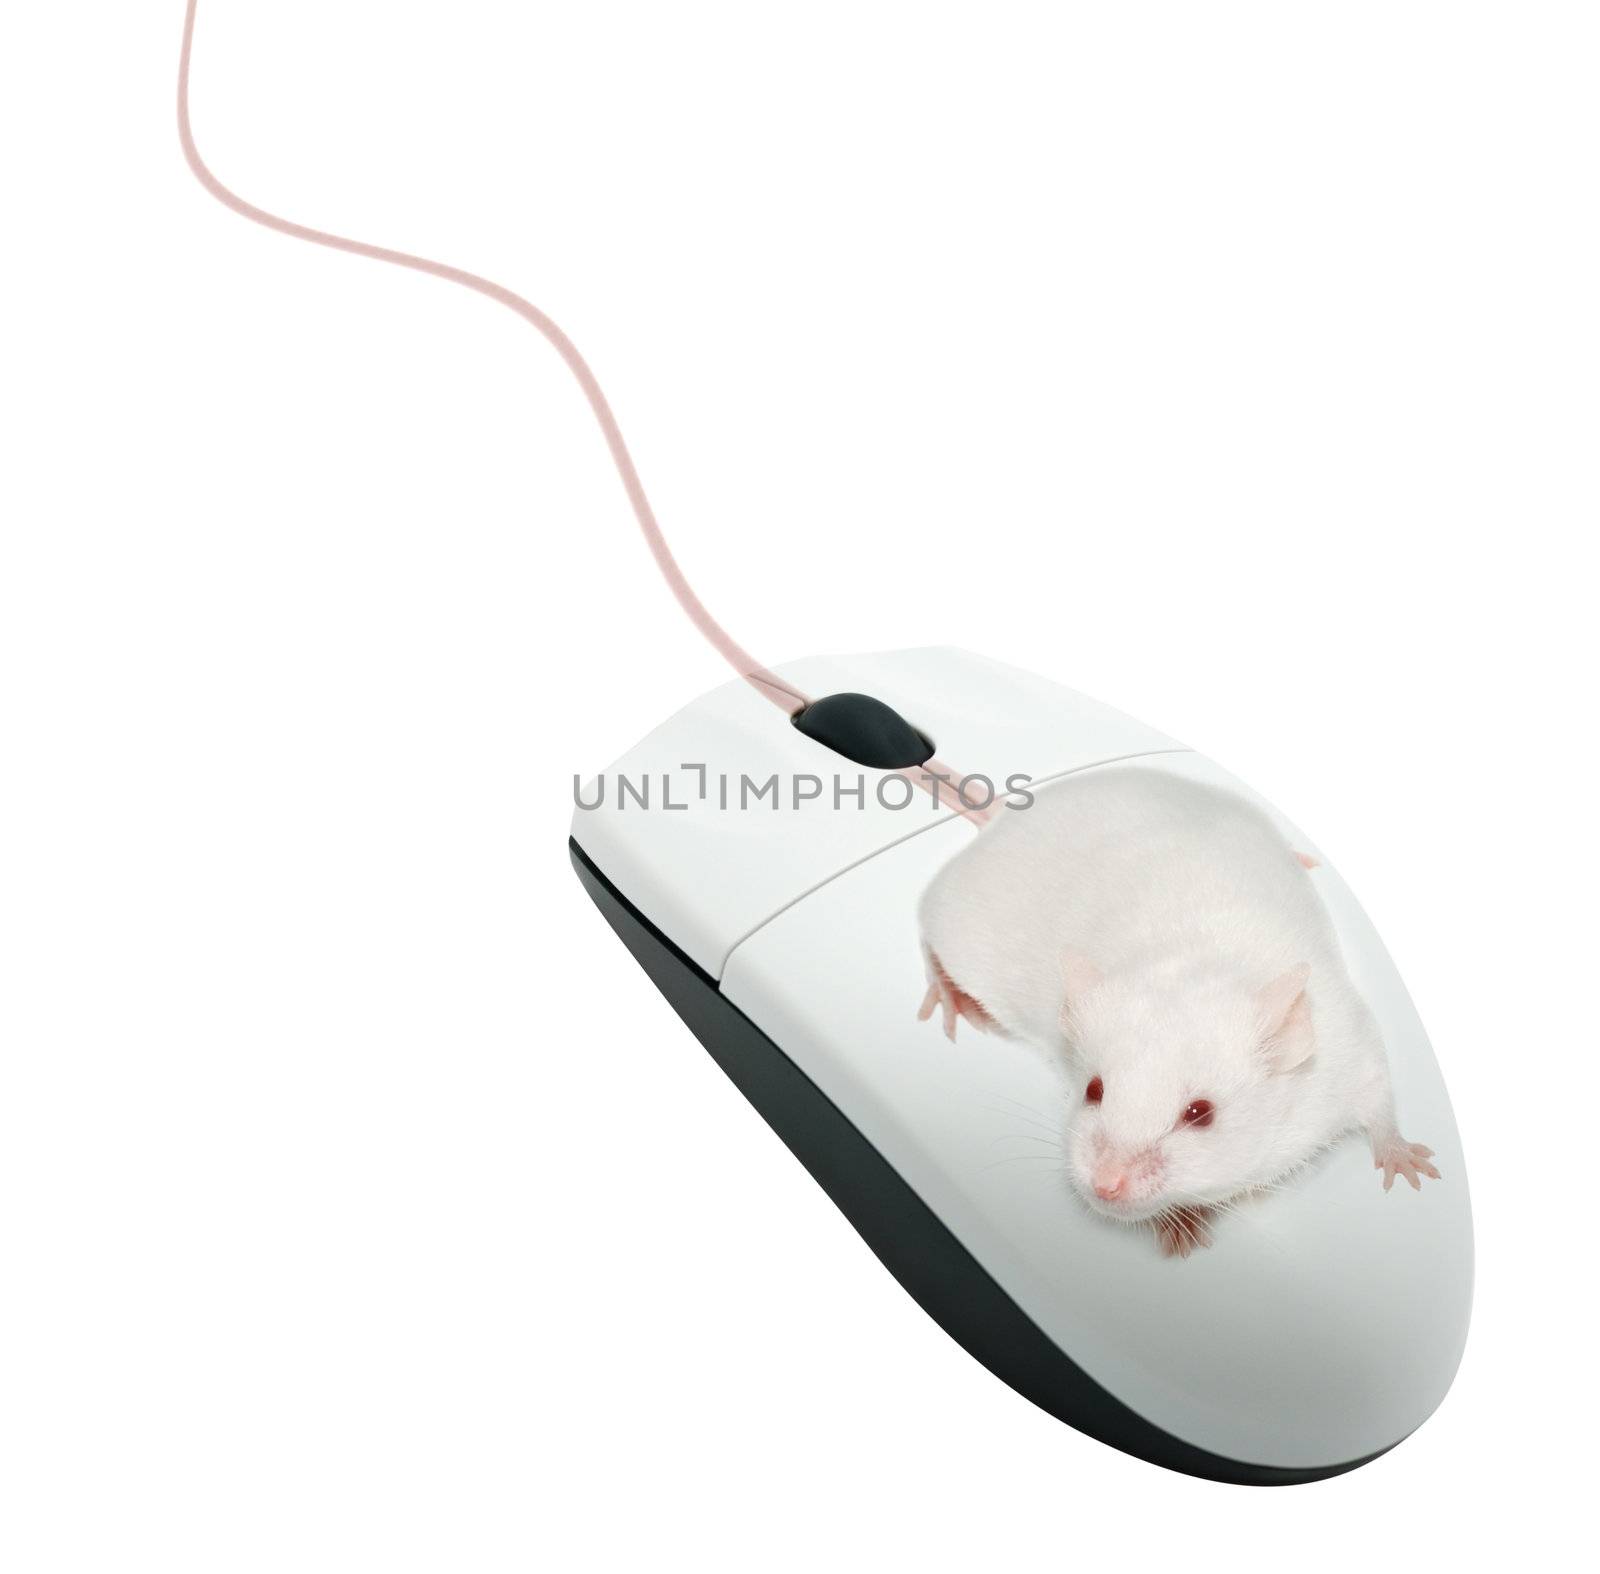 Live mouse on a computer mouse. It is isolated on a white background